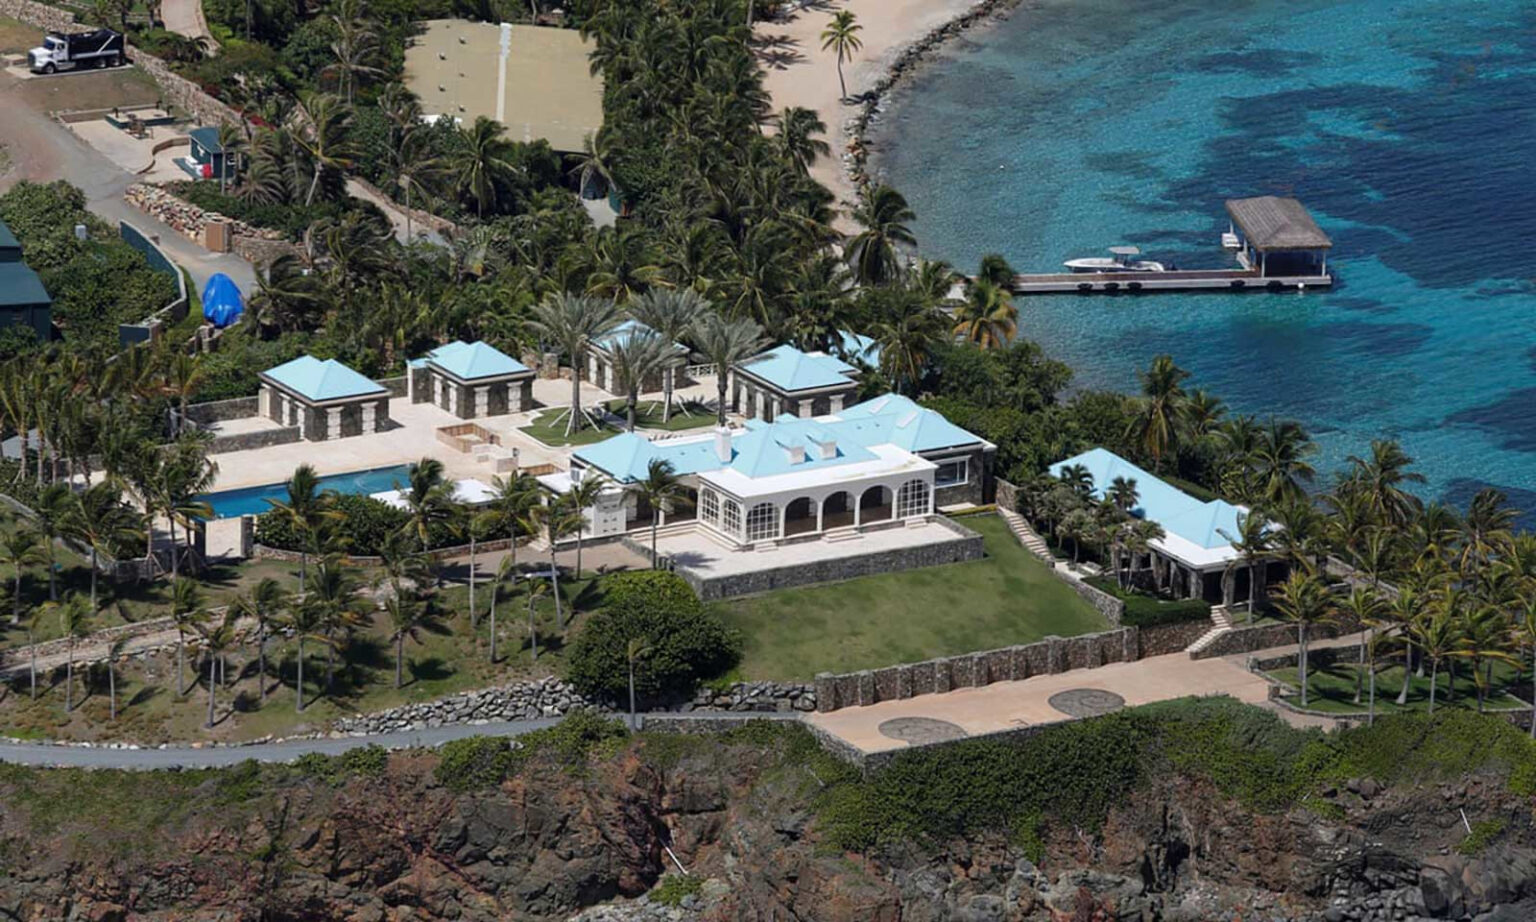 Curious about what they found on Jeffrey Epstein's island, Little St. James? Read about the island's history and how Epstein got away with crime there.